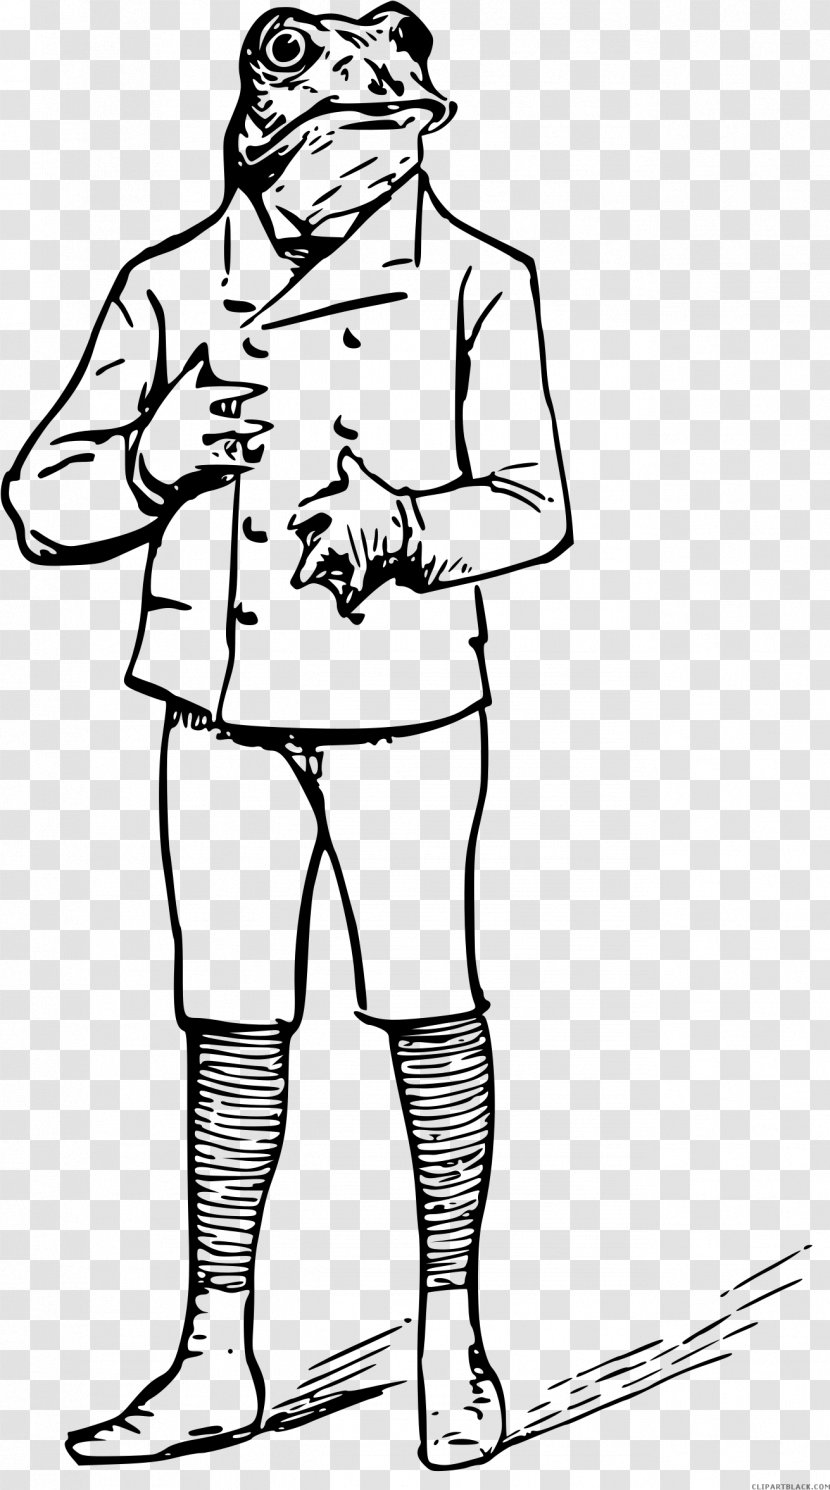 Book Black And White - Finger - Costume Gesture Transparent PNG